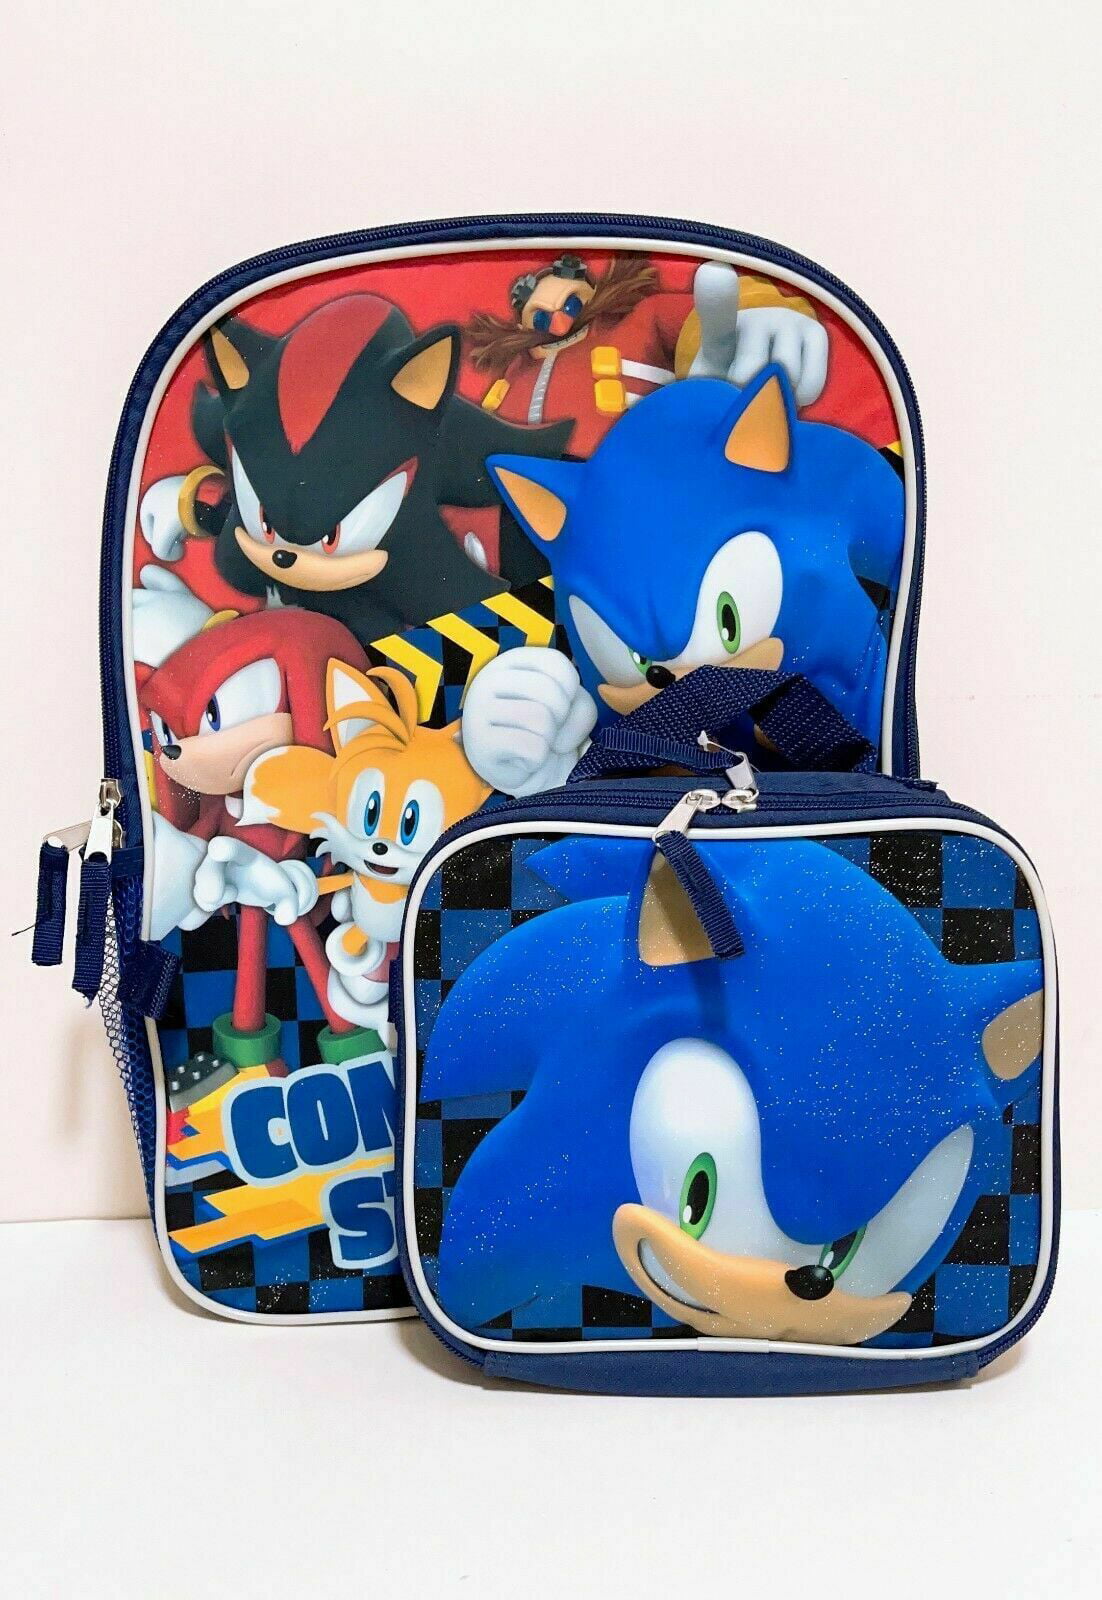 Sonic The Hedgehog Boys School Backpack Book Bag 16" Toy Gift Game Lunch Box SET 